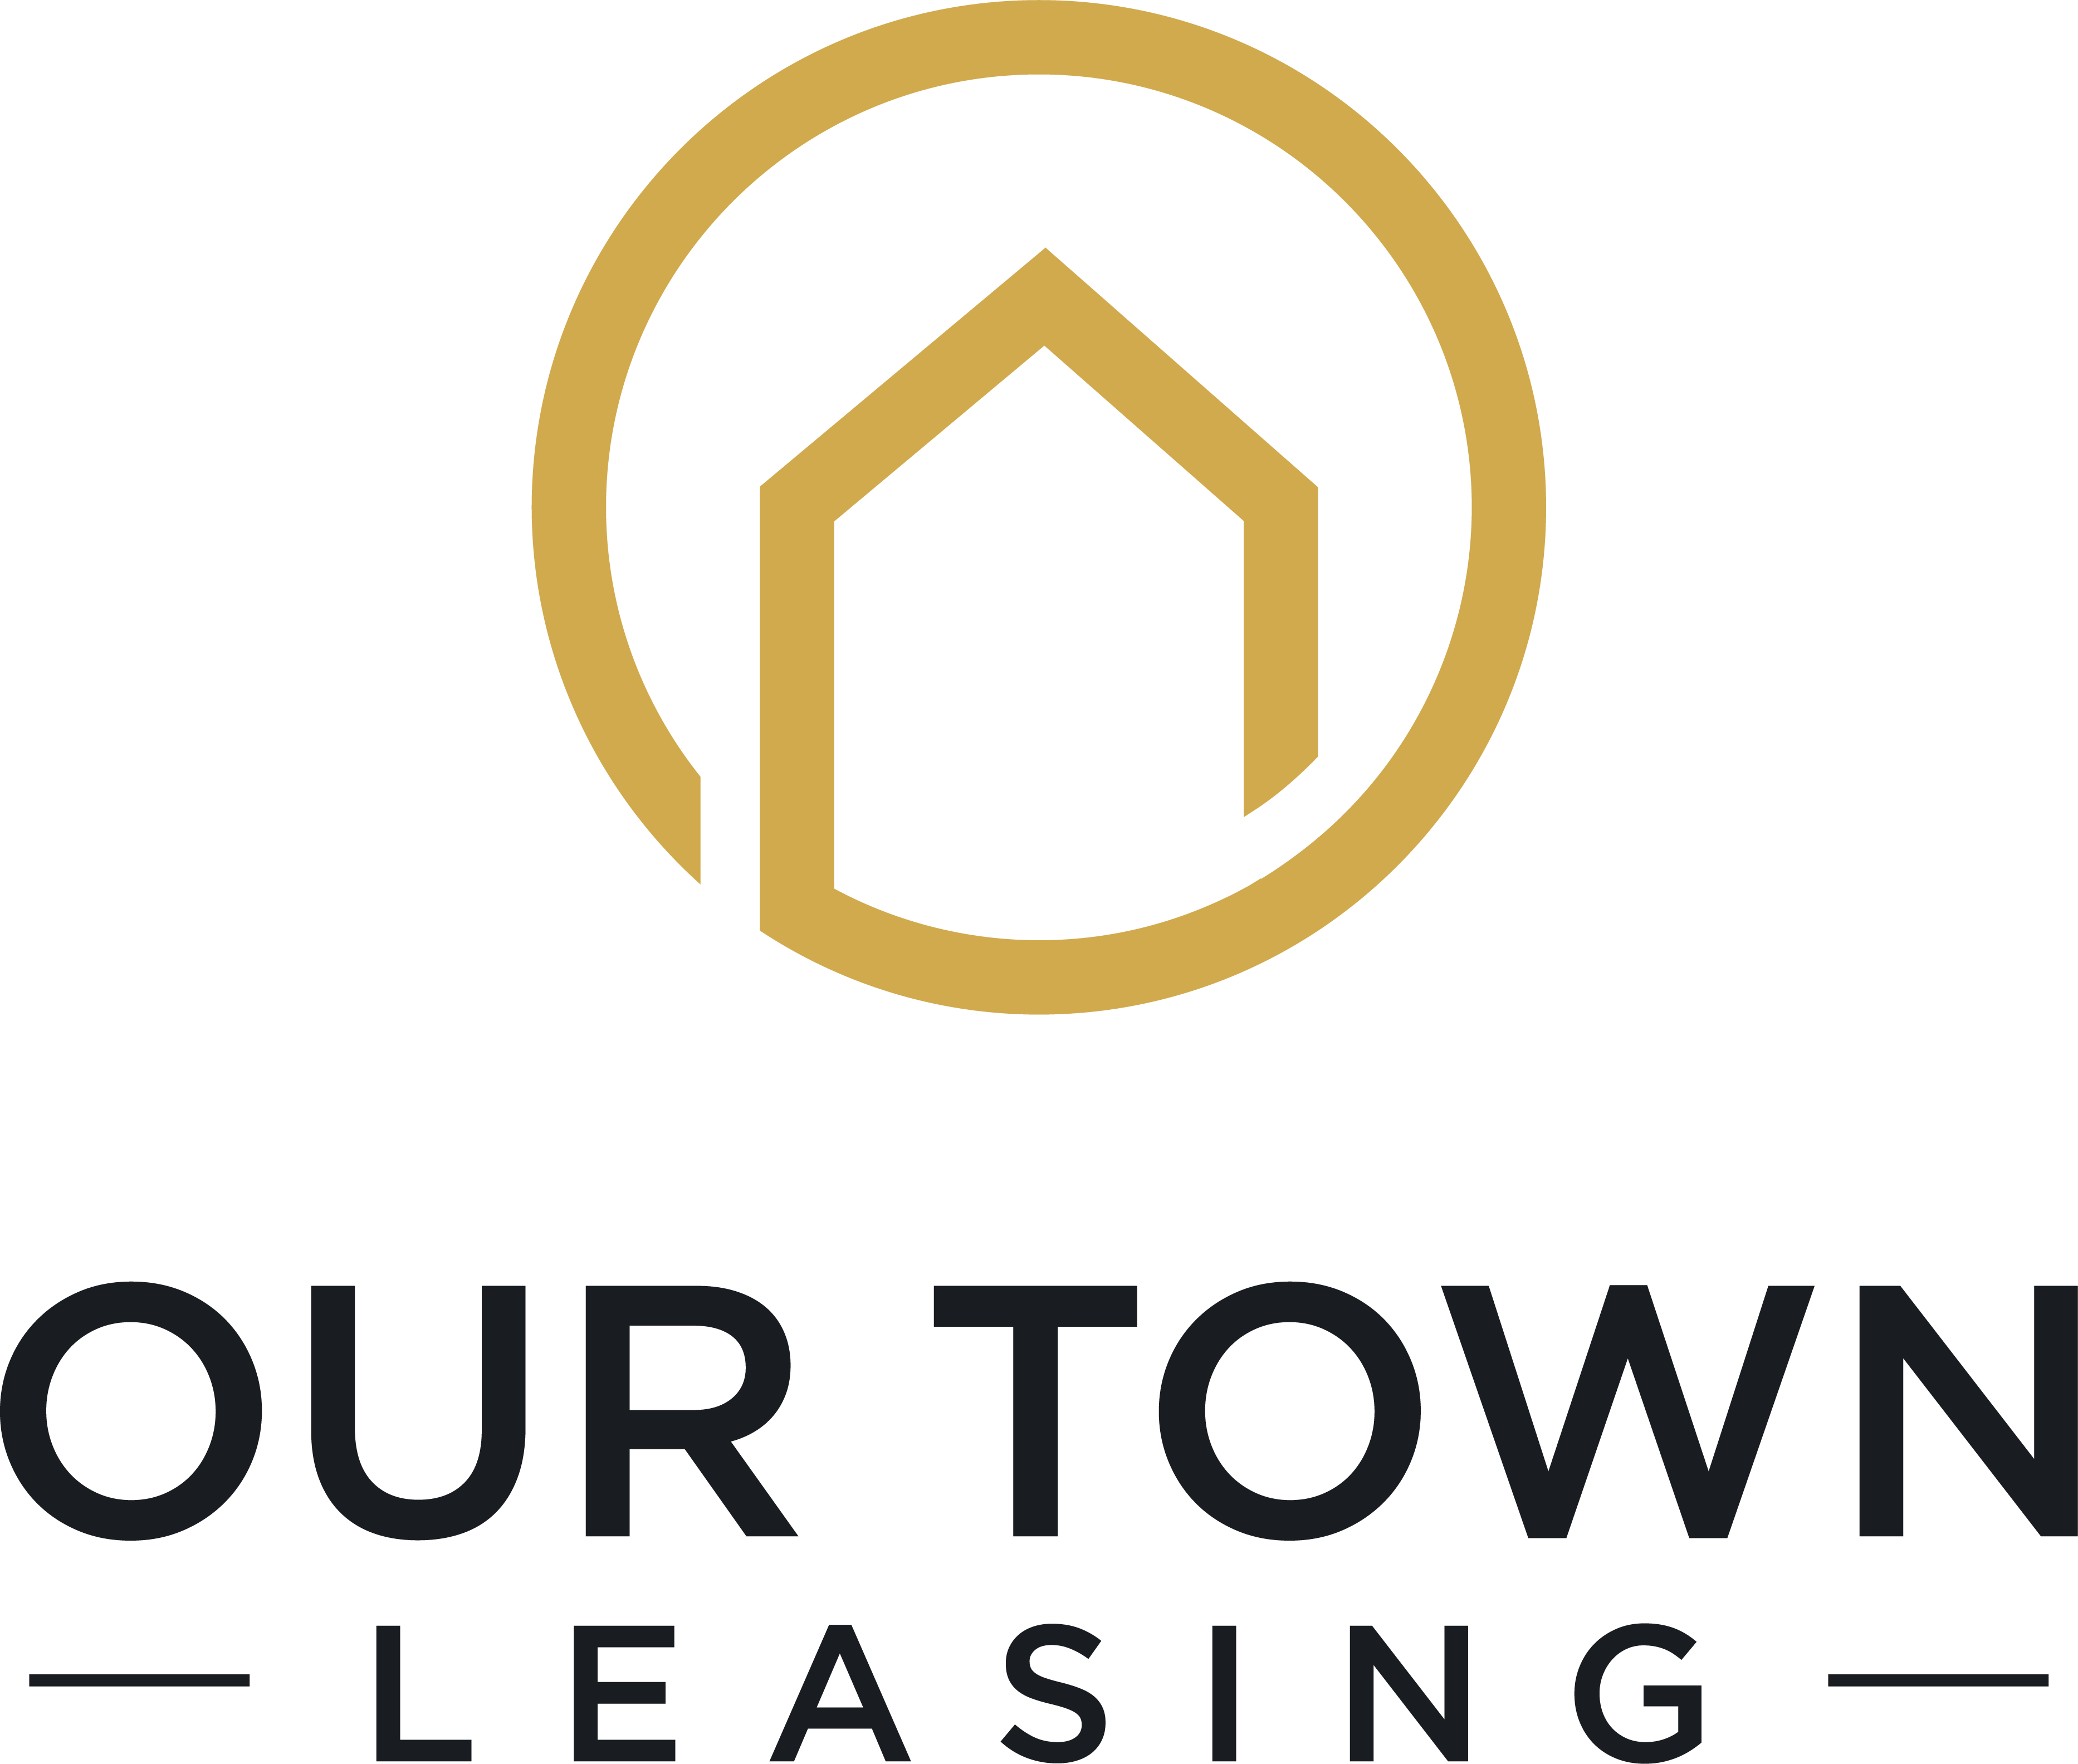 Our Town Leasing logo